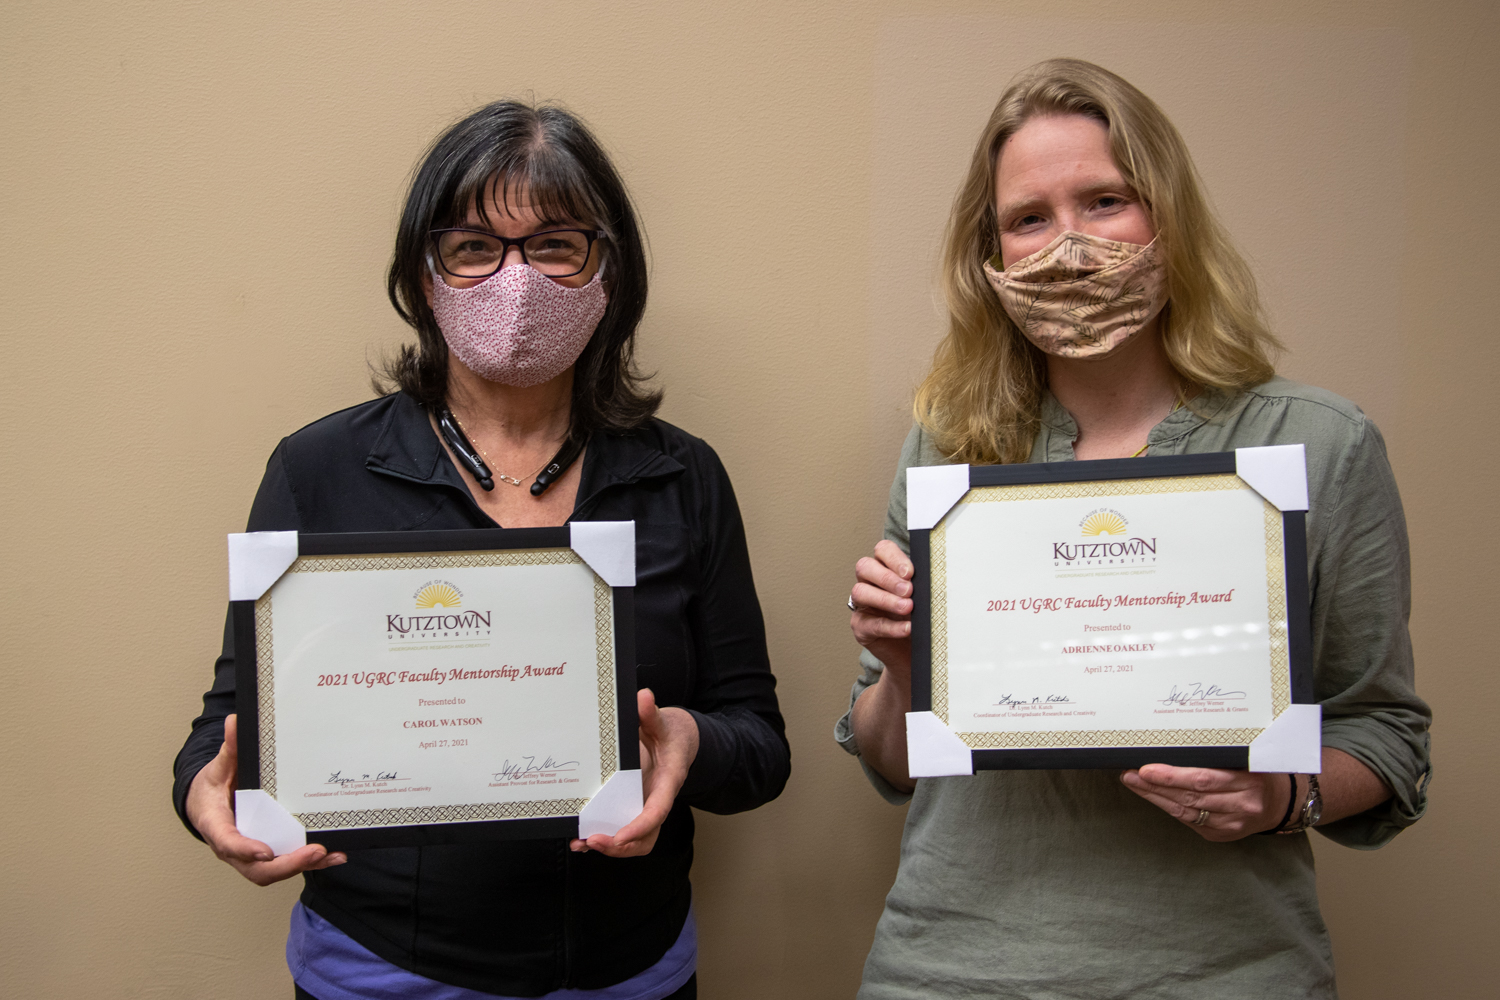 Dr. Carol Haney-Watson and Dr. Adrienne Oakley pose with their certificates.